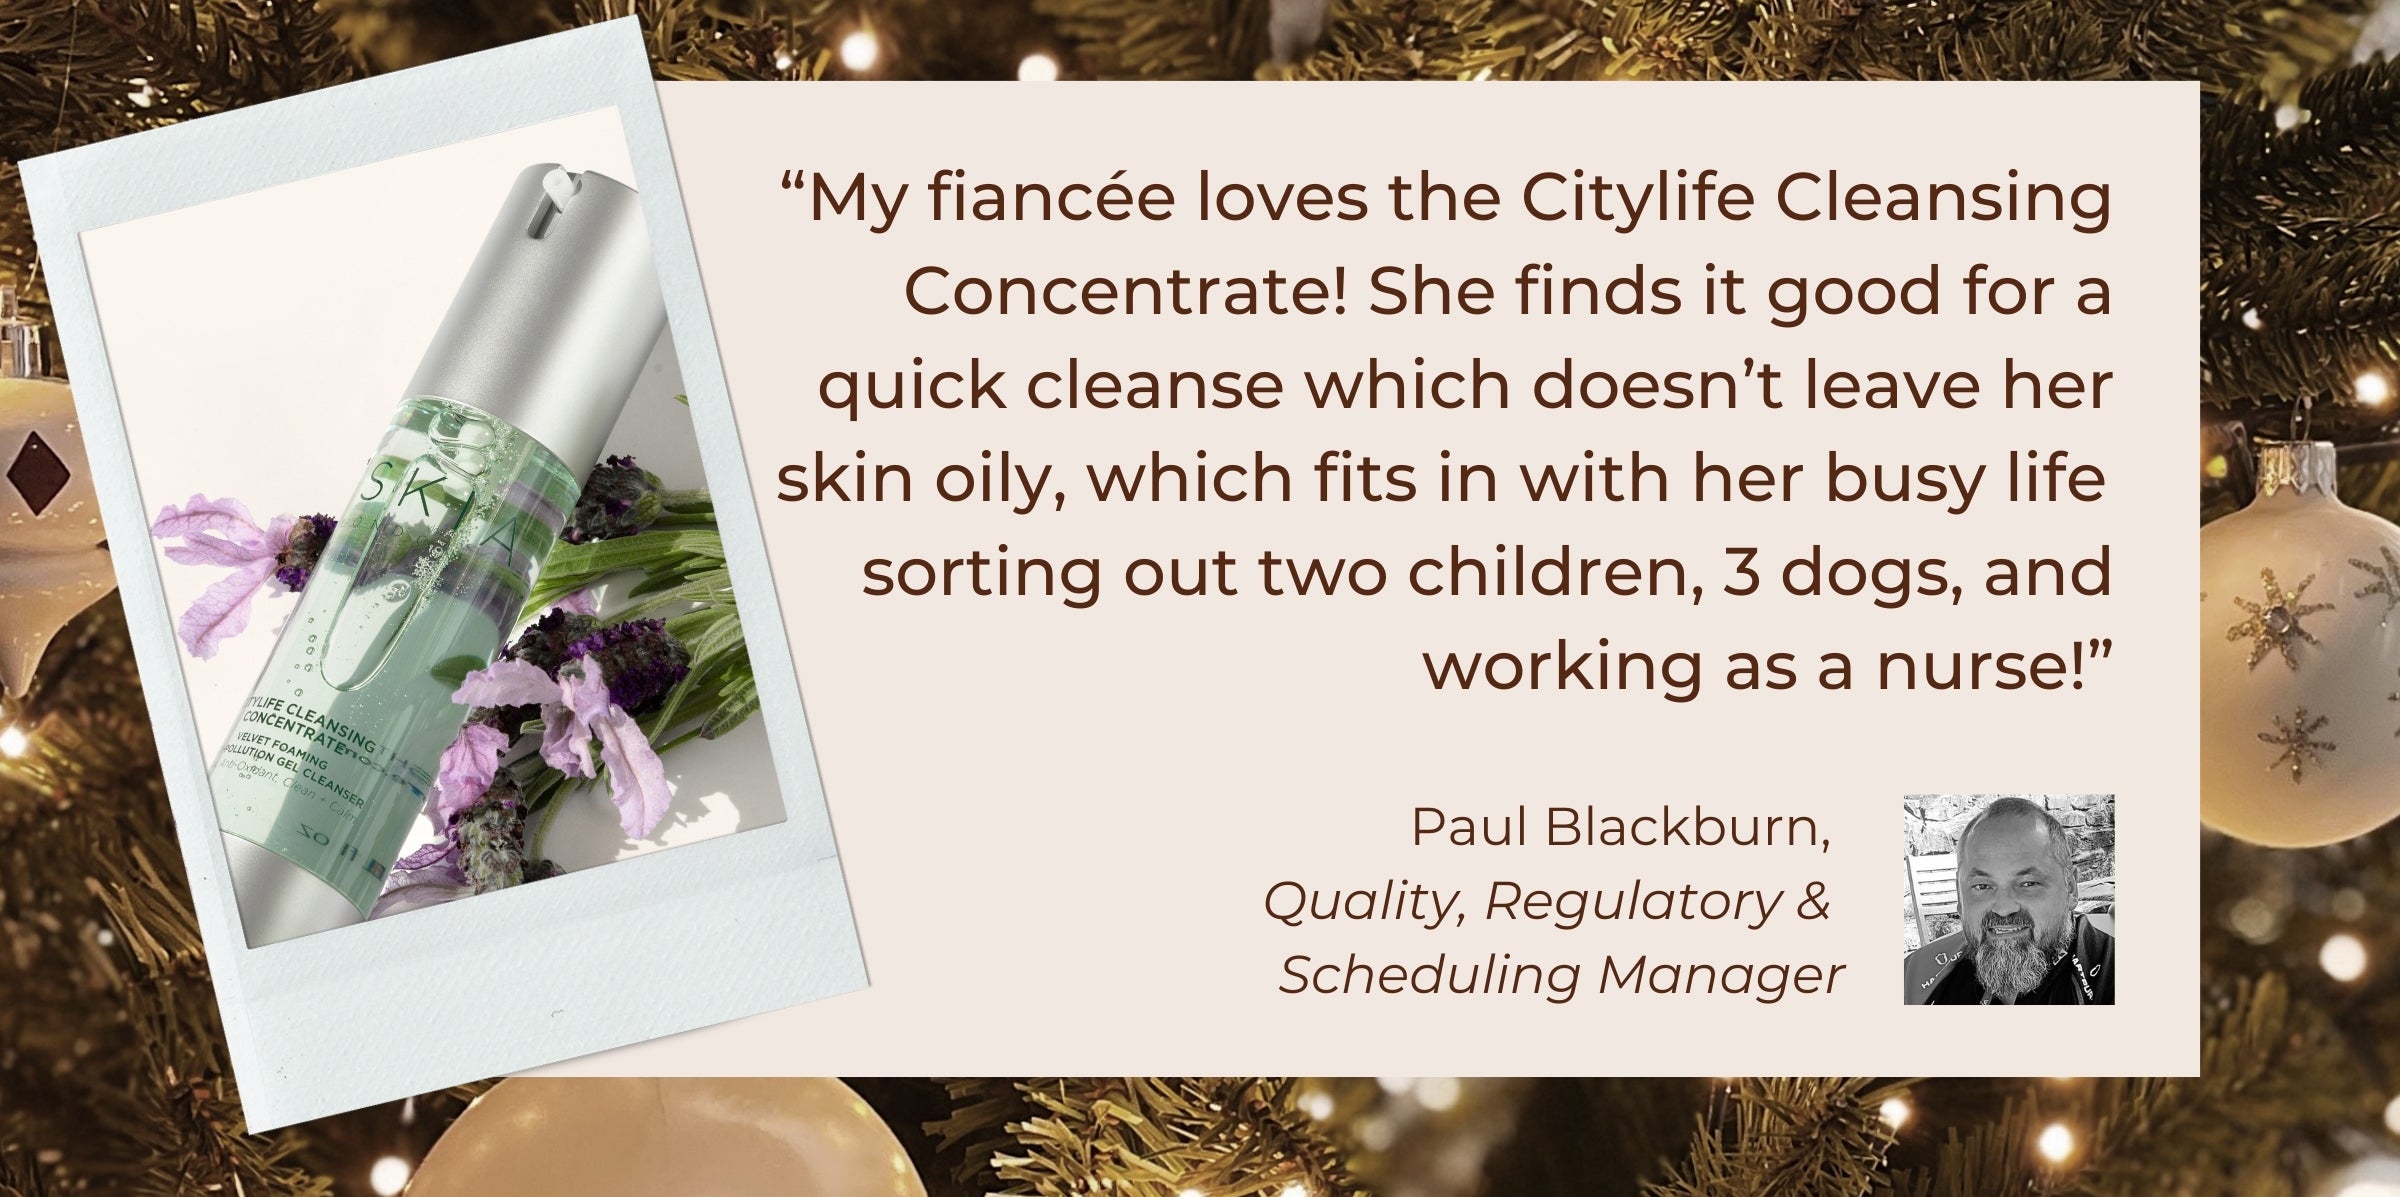 "My fiancée loves the Citylife Cleansing Concentrate! She finds it good for a quick cleanse which doesn't leave her skin oily, which fits in with her busy life sorting out two children, 3 dogs, and working as a nurse!